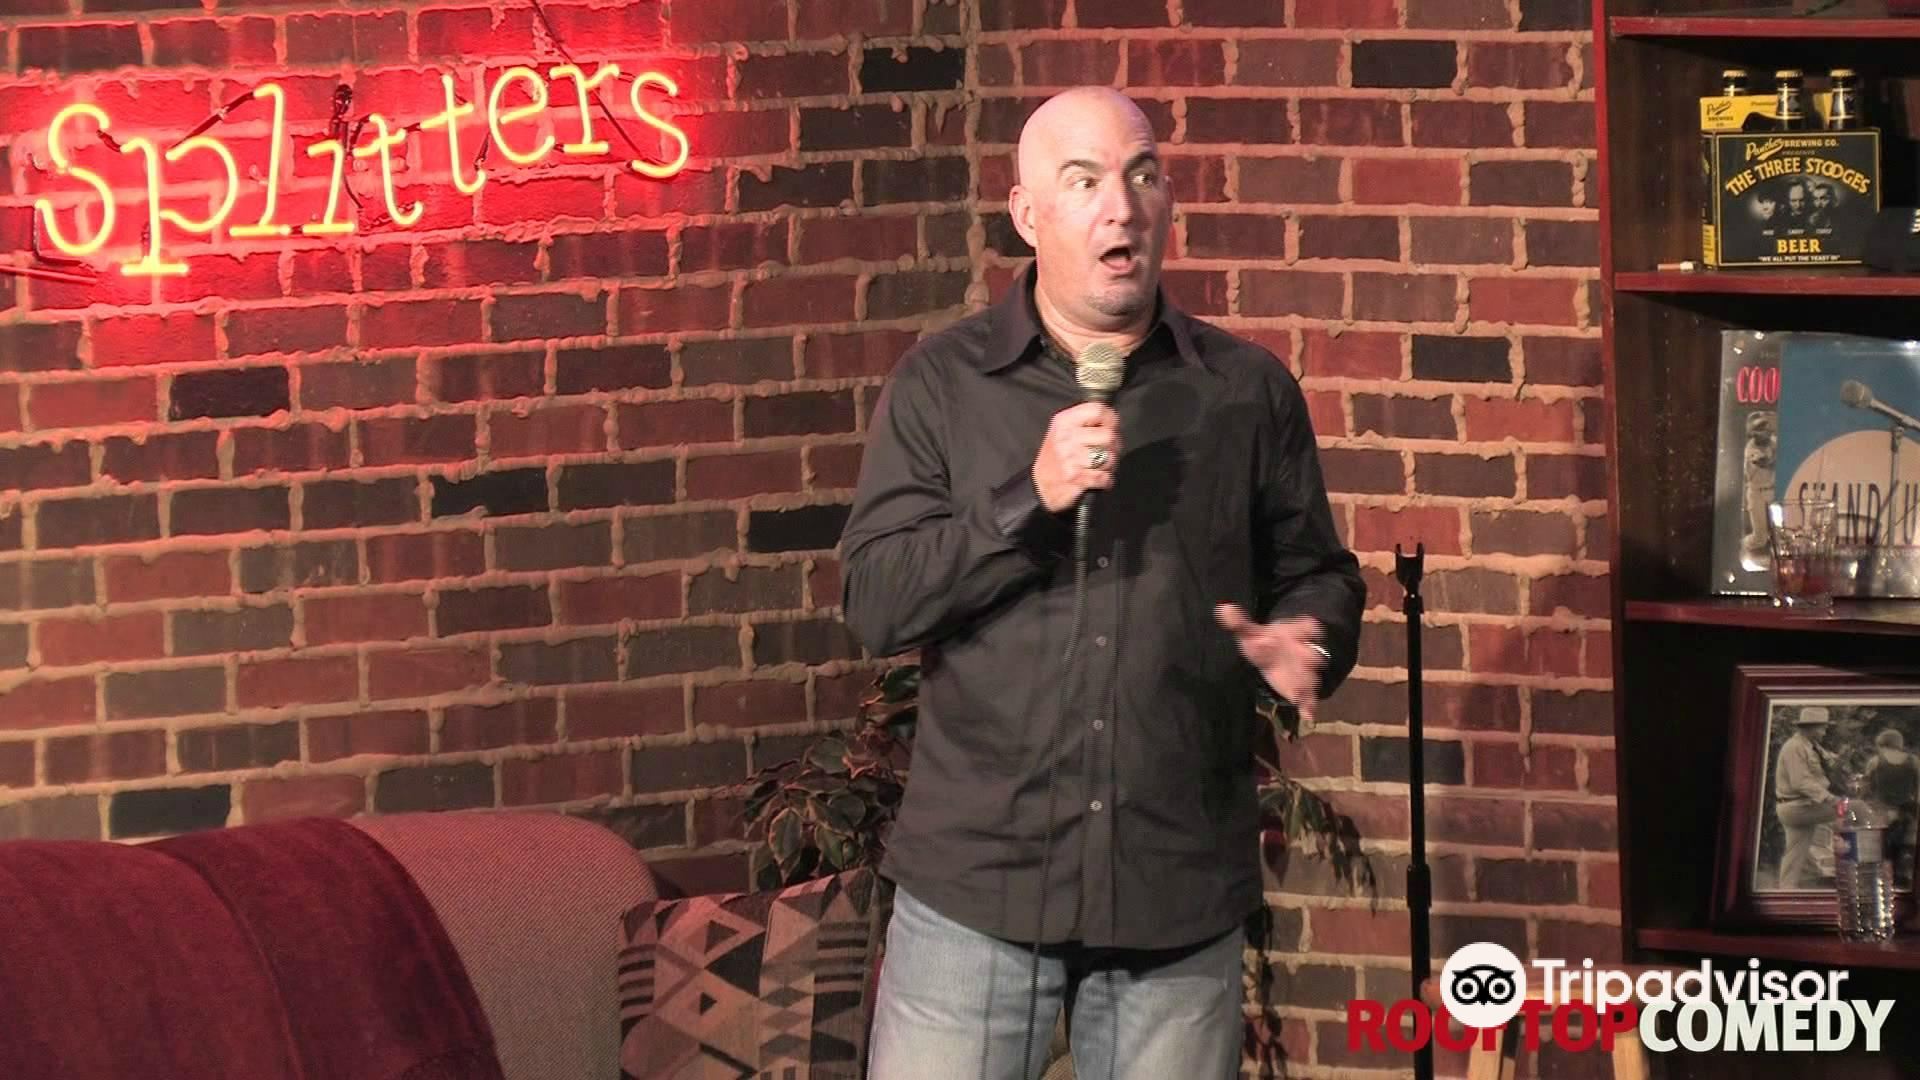 Side Splitters Comedy Club Takes Comedy to a New Level in Tampa, Florida